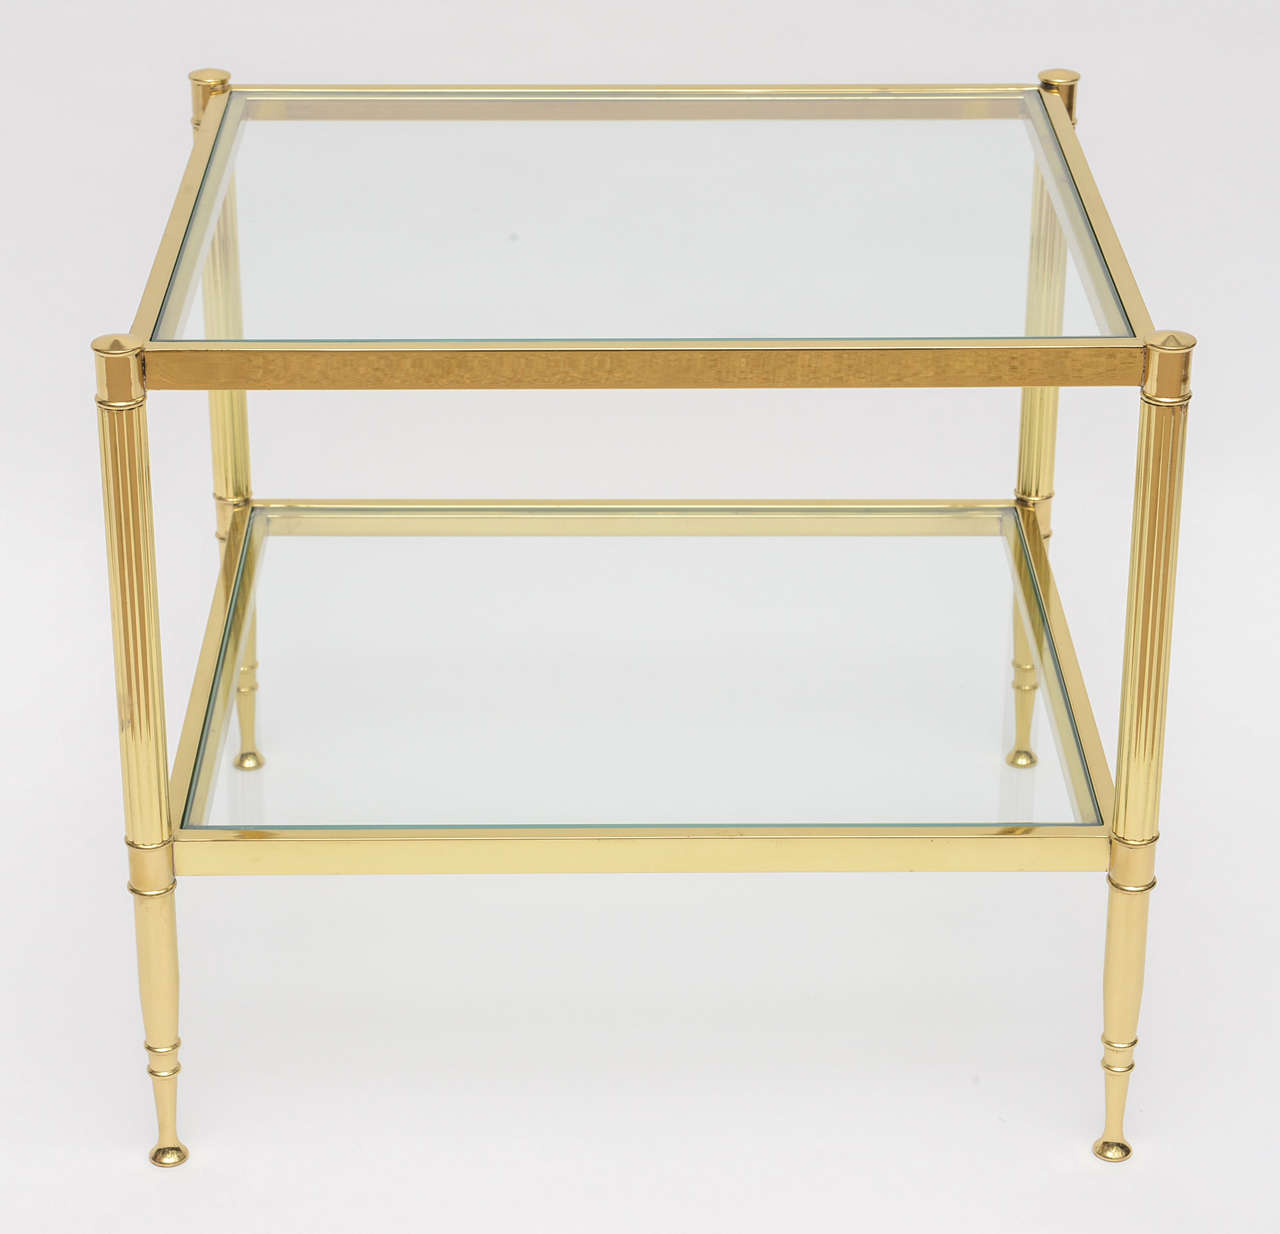 Mid-Century Modern 2 tier Side table in the style of Maison Jansen in brass with glass.
In good vintage condition with some light wear to the brass.
